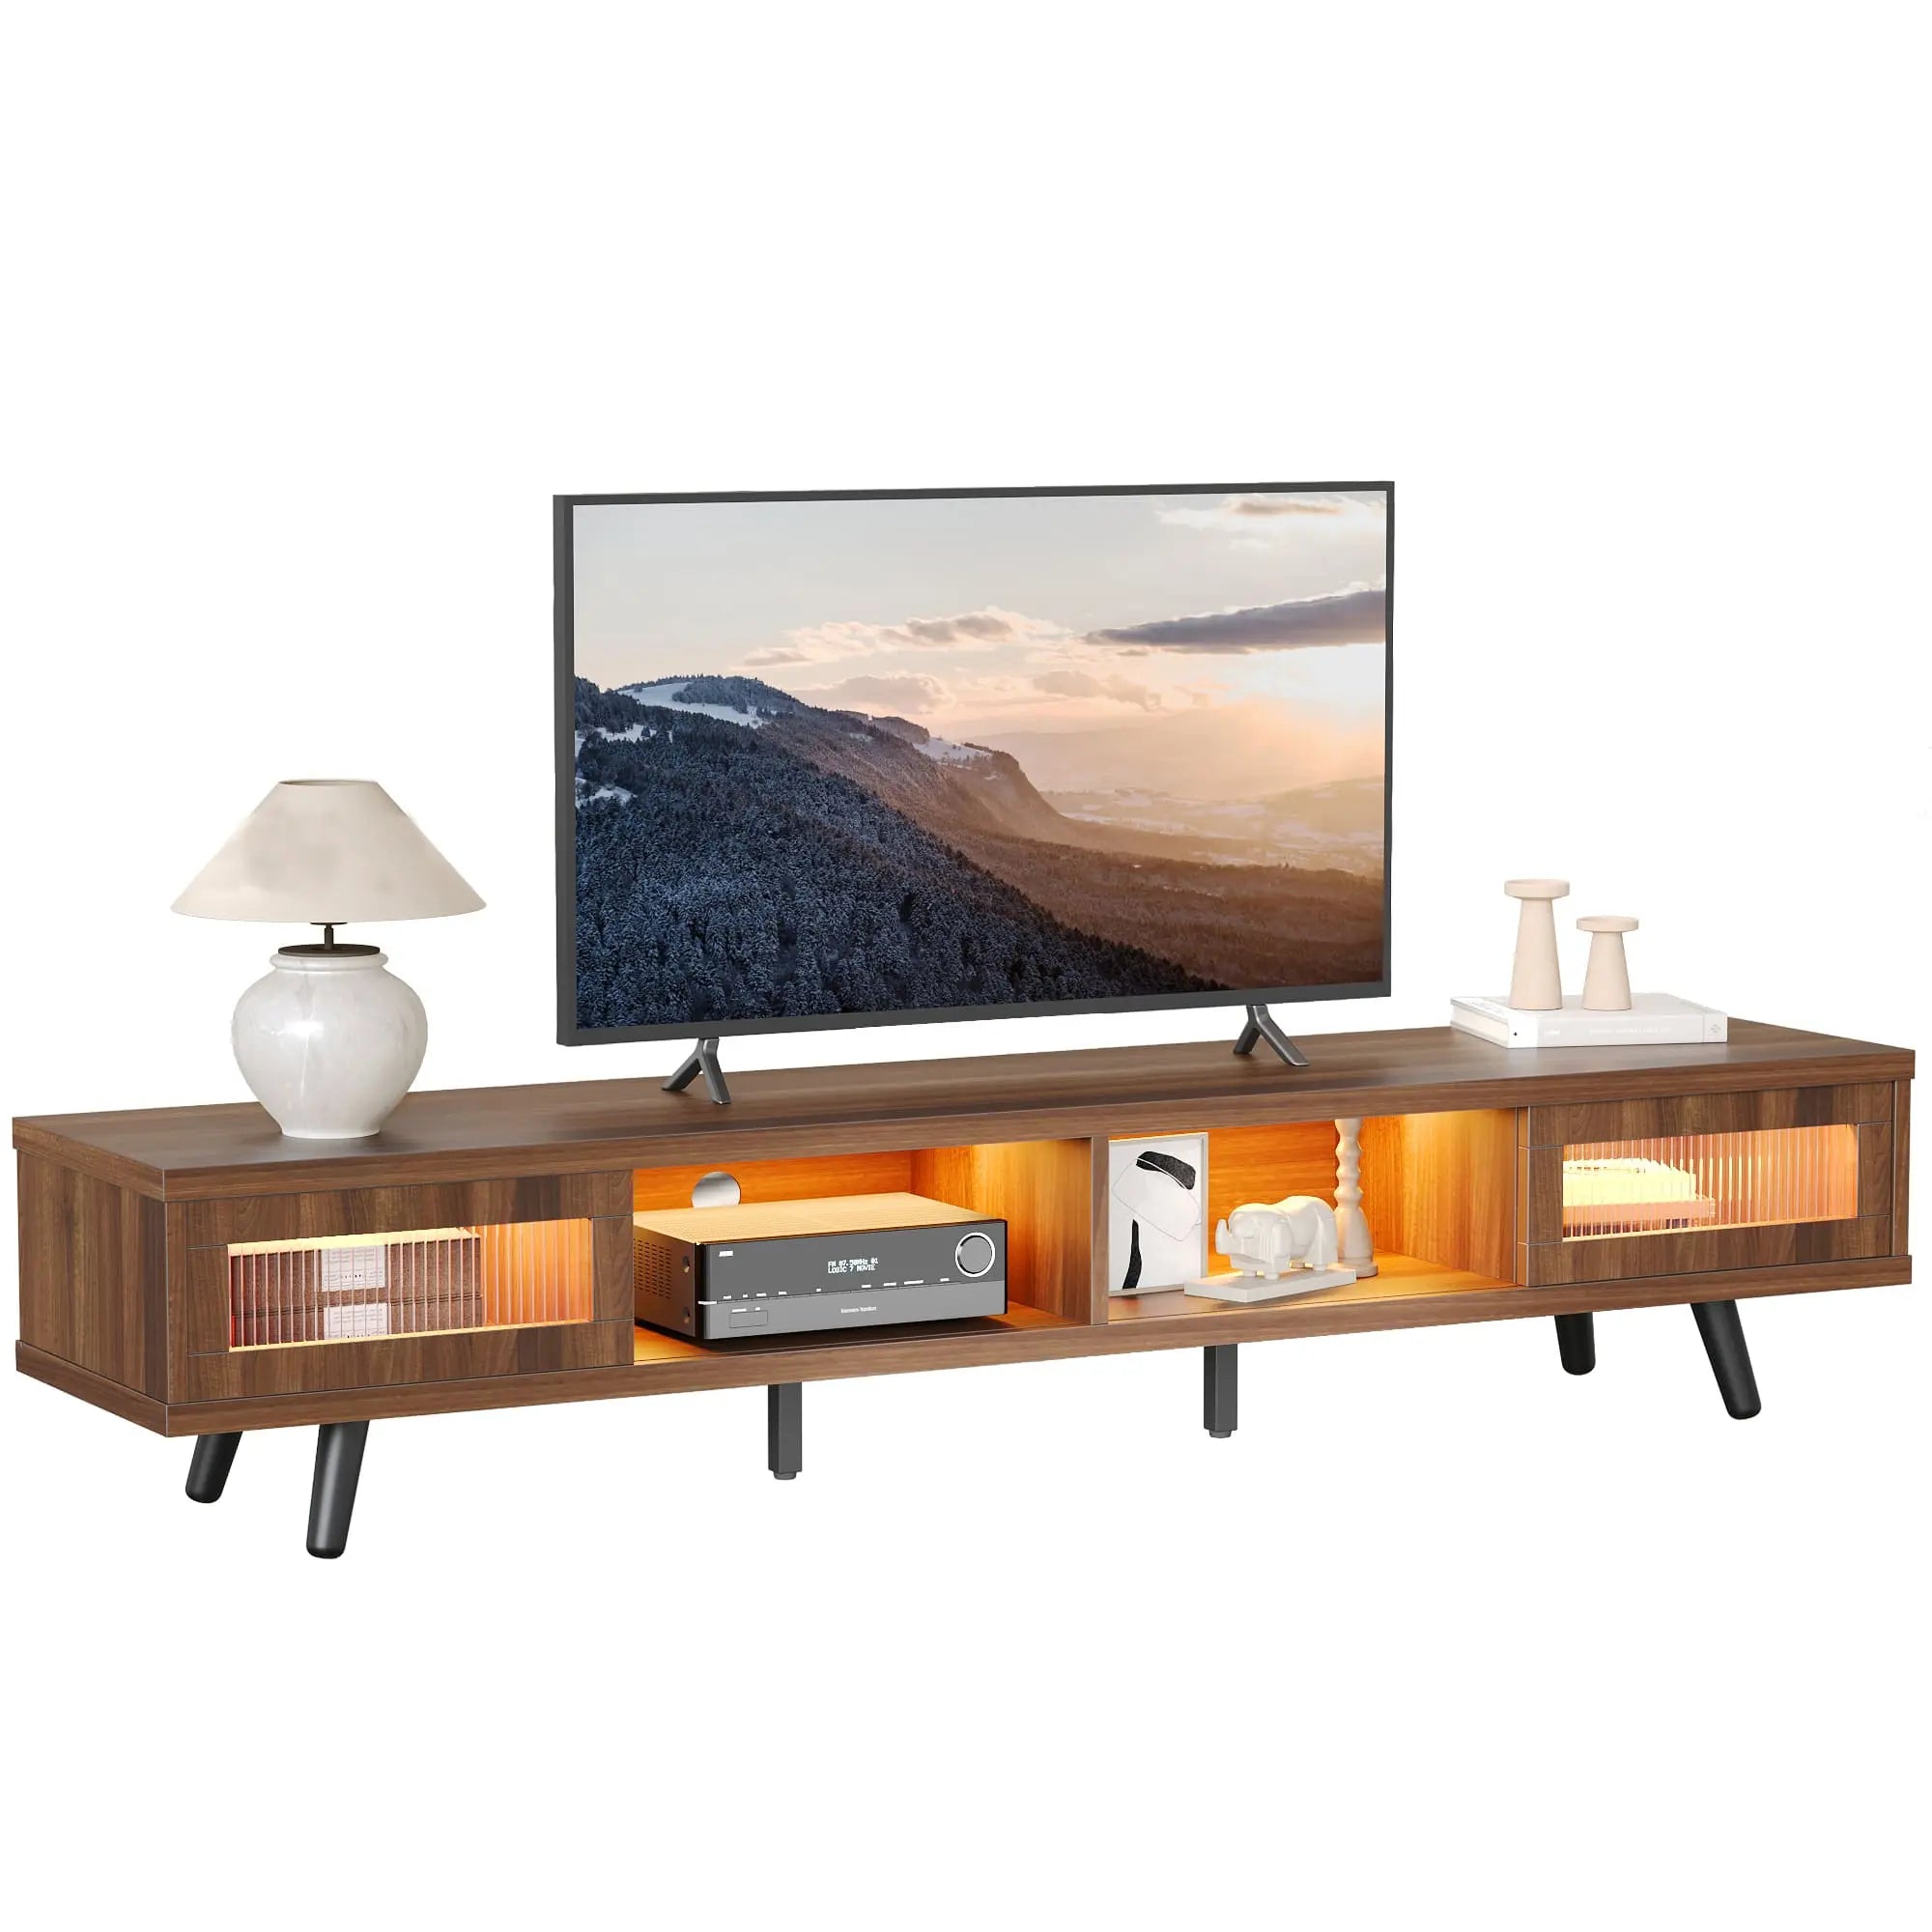 Bestier 70 inch LED Modern Low Profile TV Consoles with storage for living room Bestier